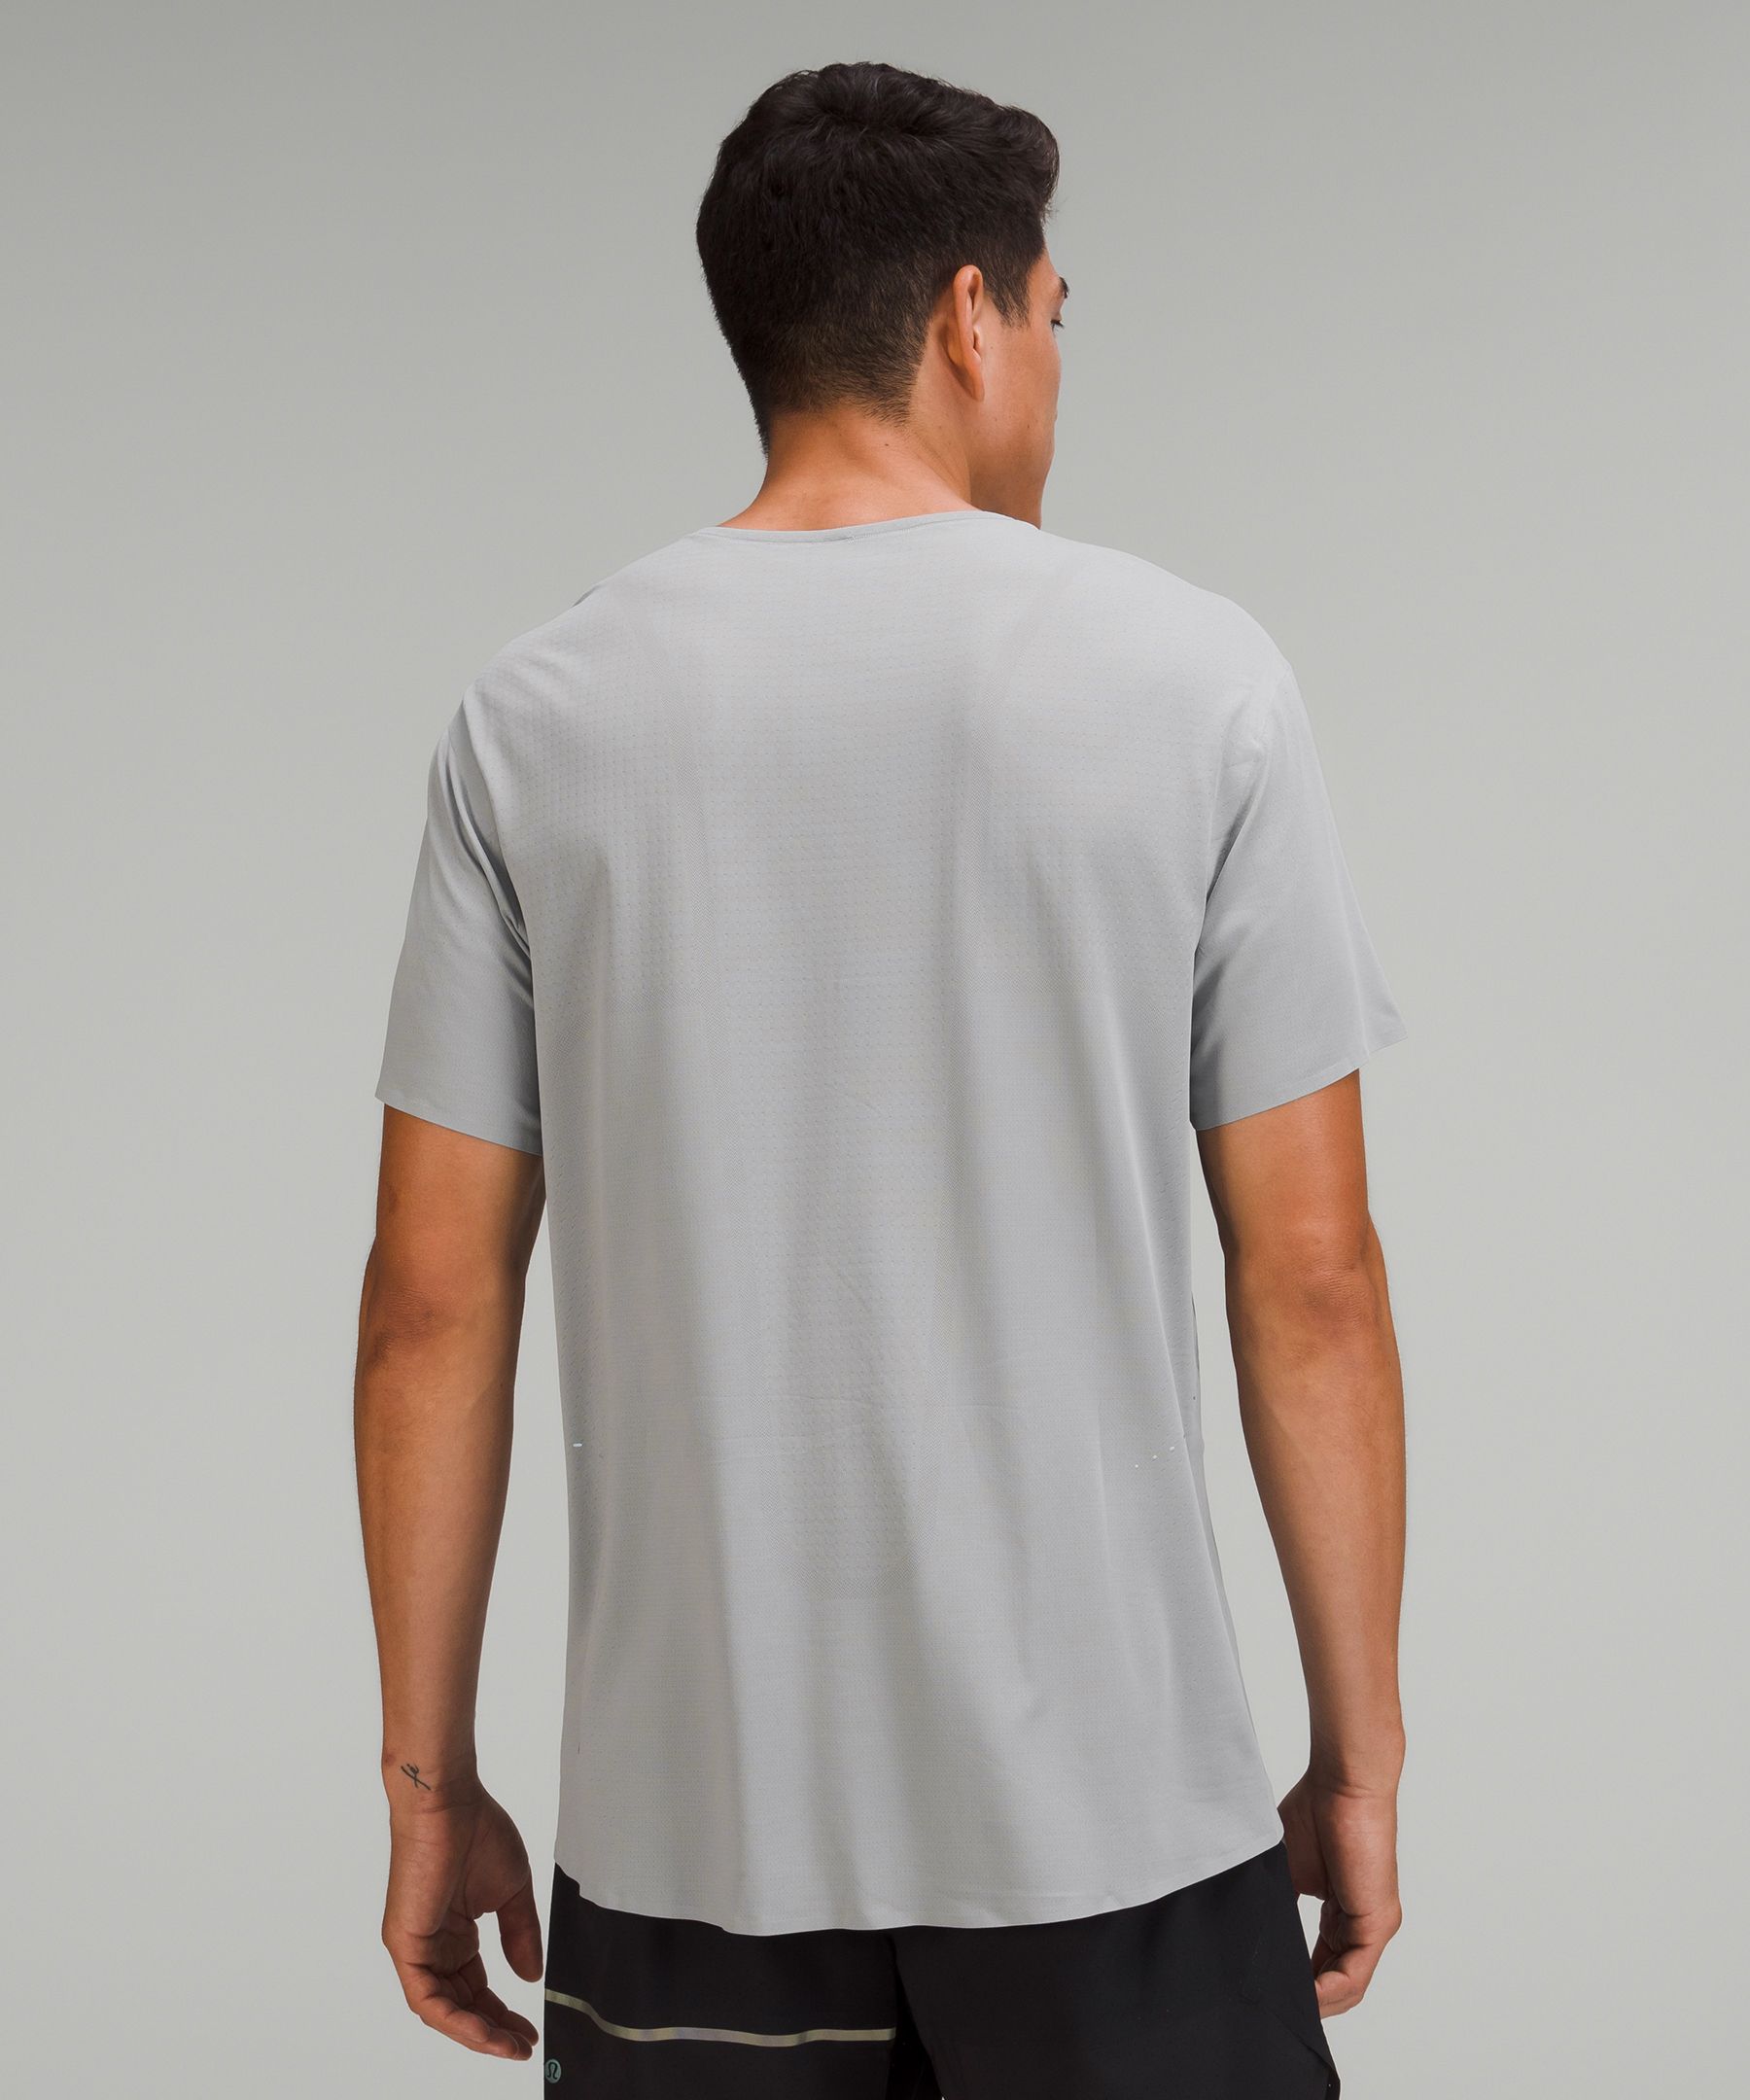 lululemon athletica Fast And Free Short-sleeve Shirt Airflow in White